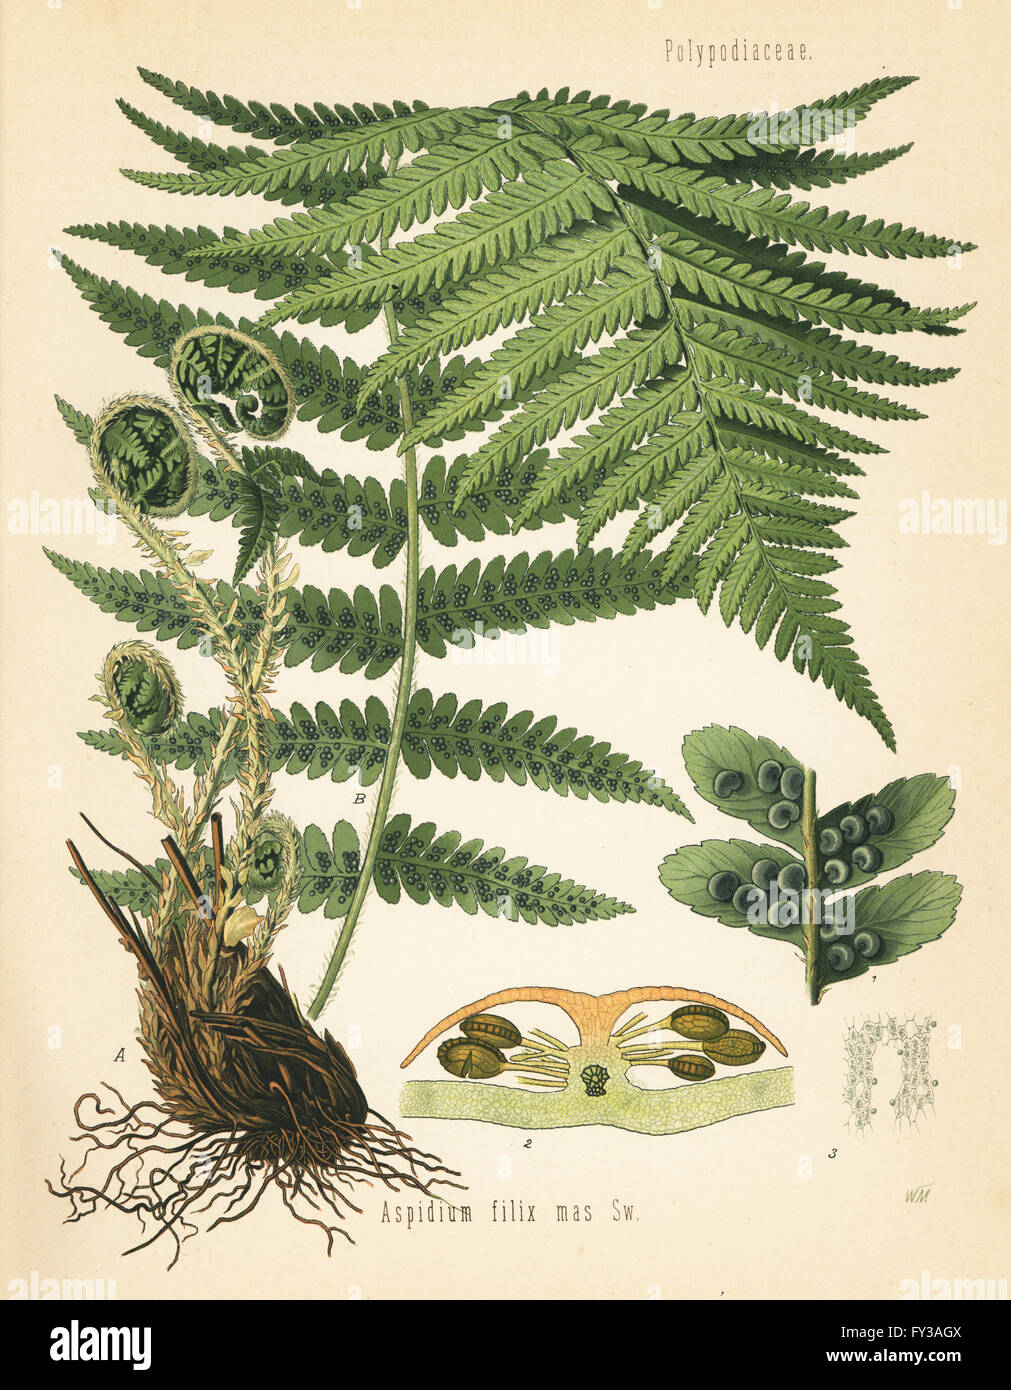 Male fern, Dryopteris filix-mas (Aspidium filix mas). Chromolithograph after a botanical illustration by Walther Muller from Hermann Adolph Koehler's Medicinal Plants, edited by Gustav Pabst, Koehler, Germany, 1887. Stock Photo